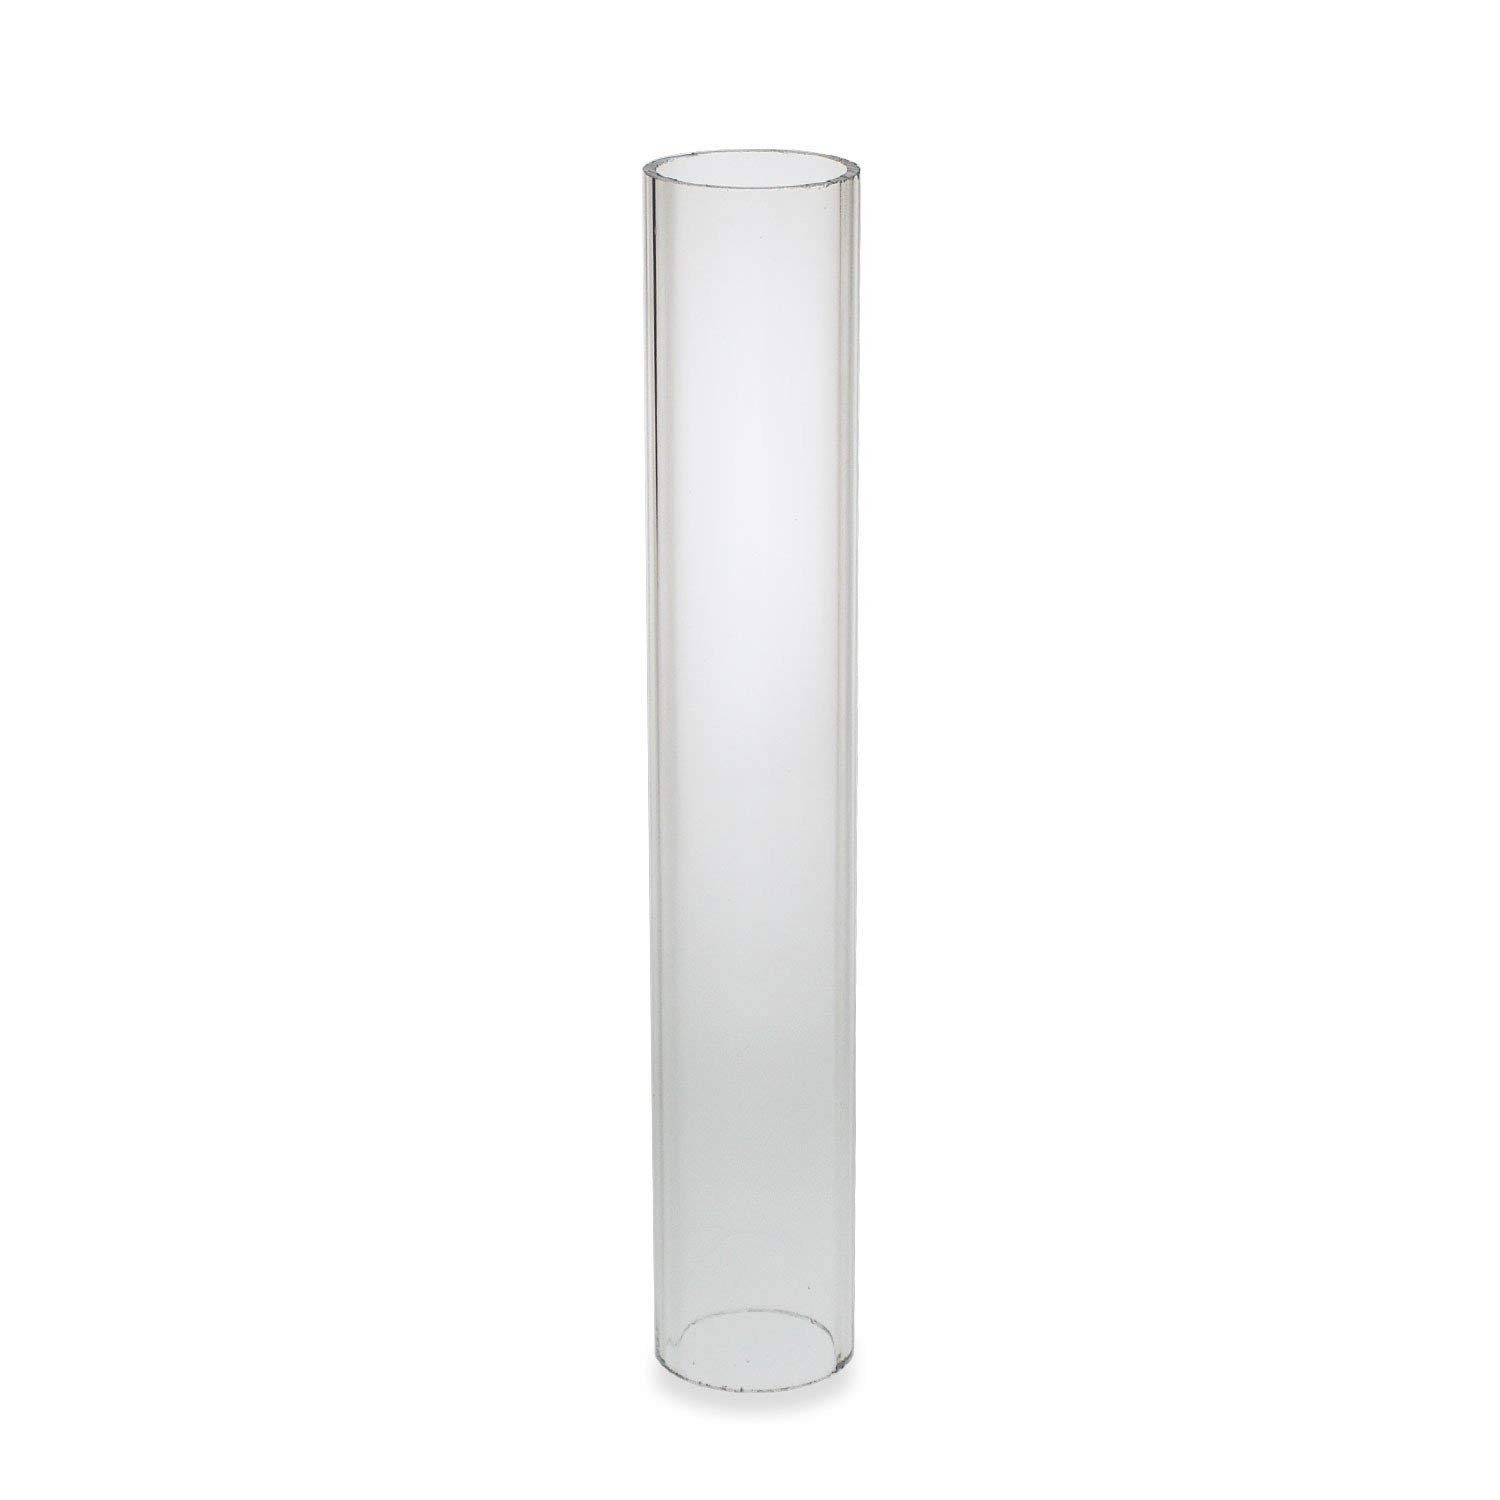 12 Elegant 16 Inch Cylinder Vases 2024 free download 16 inch cylinder vases of amazon com source one deluxe clear acrylic tube 2 inches thick 12 for amazon com source one deluxe clear acrylic tube 2 inches thick 12 inch 2 inch wide office prod